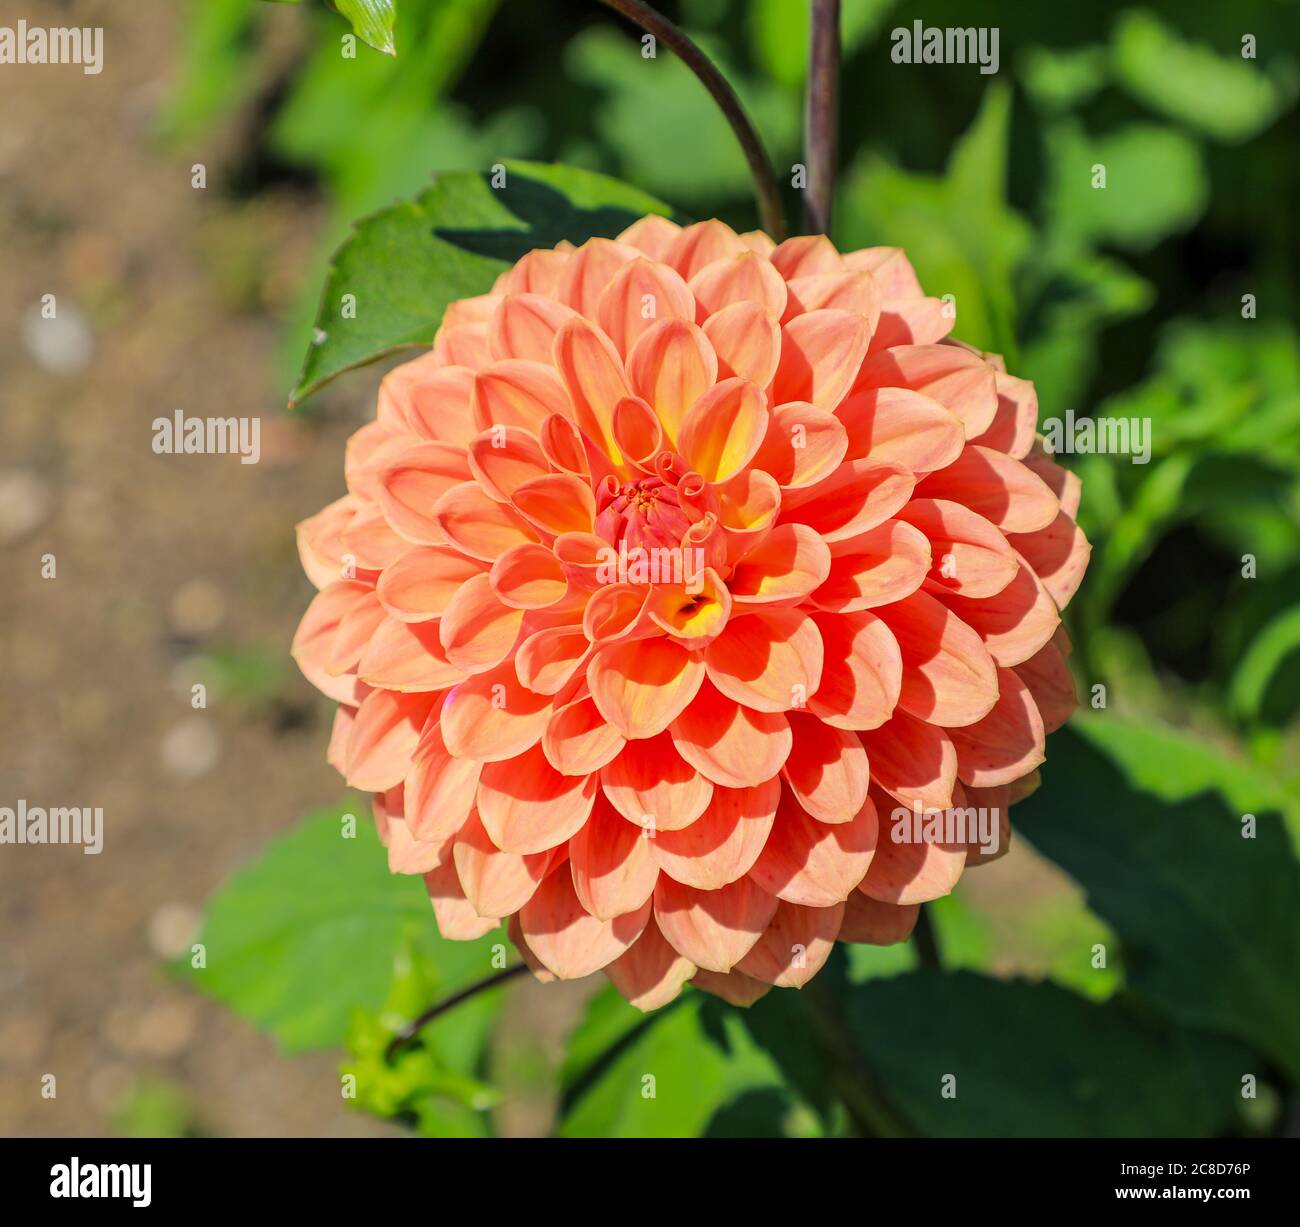 Close up shot of an orange flower head of a Dahlia named 'John Prior' at the National Dahlia Collection, Penzance, Cornwall, England Stock Photo